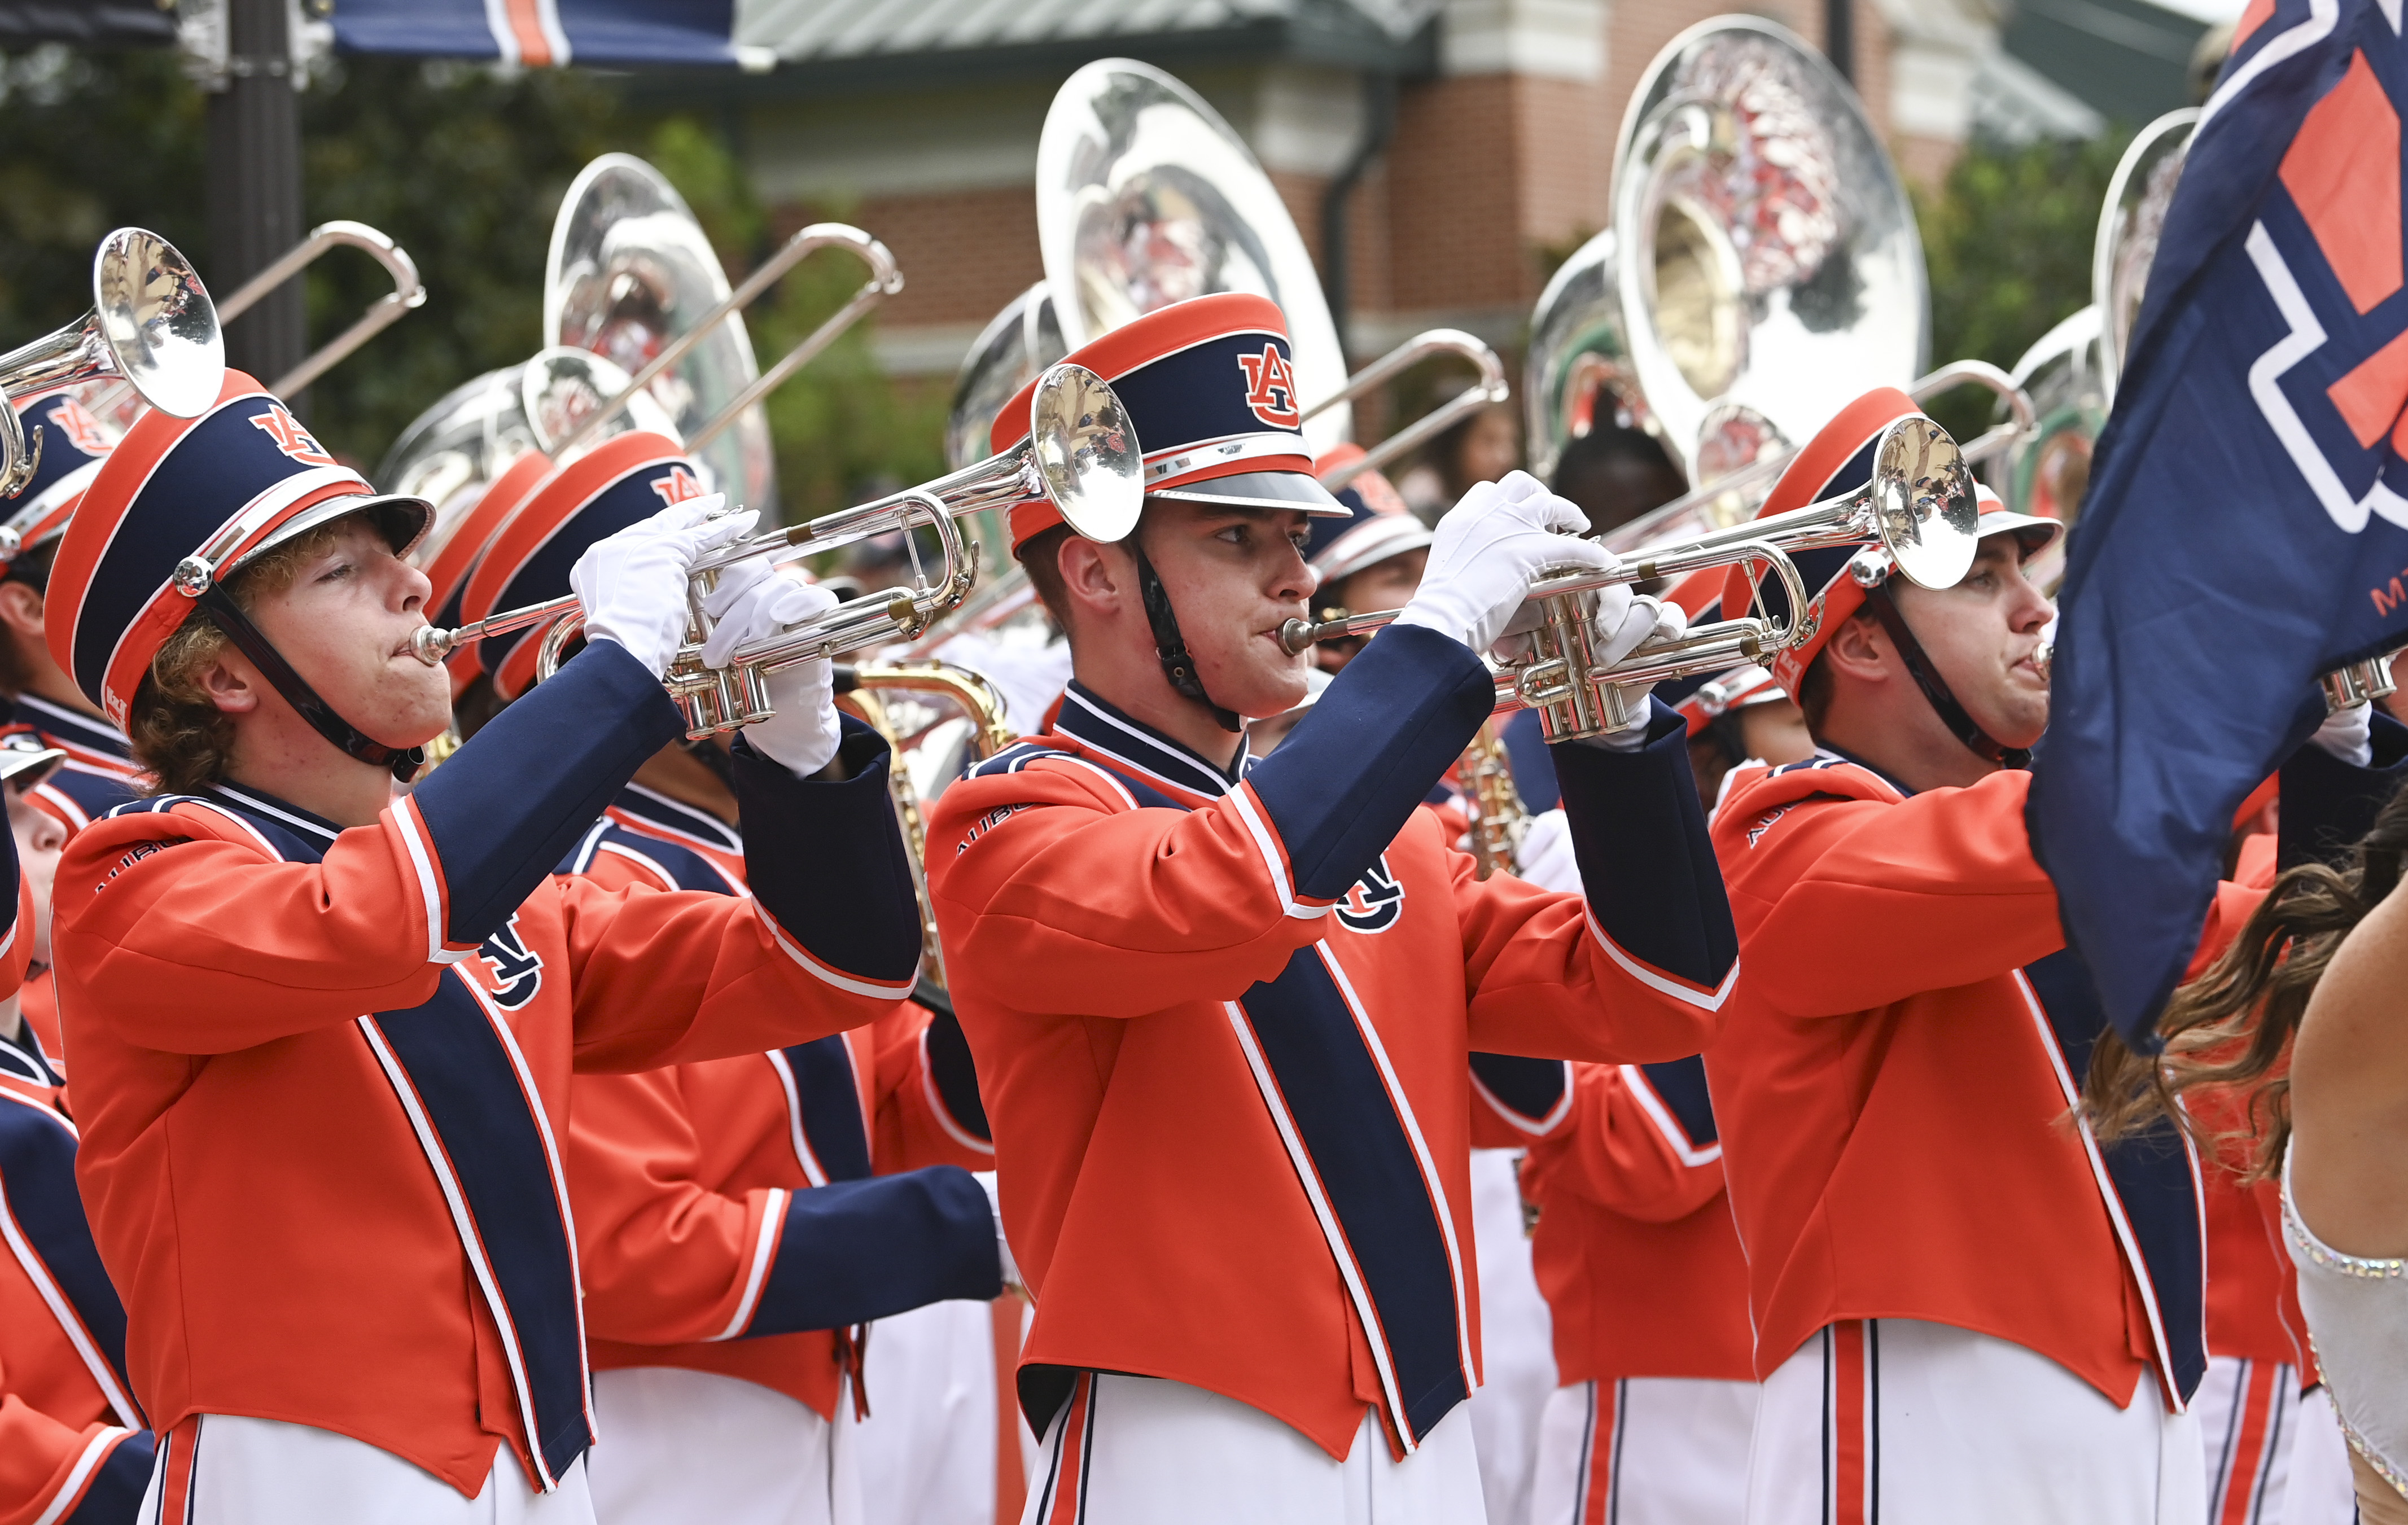 Auburn wins Metallica Marching Band Competition, gets $85K in